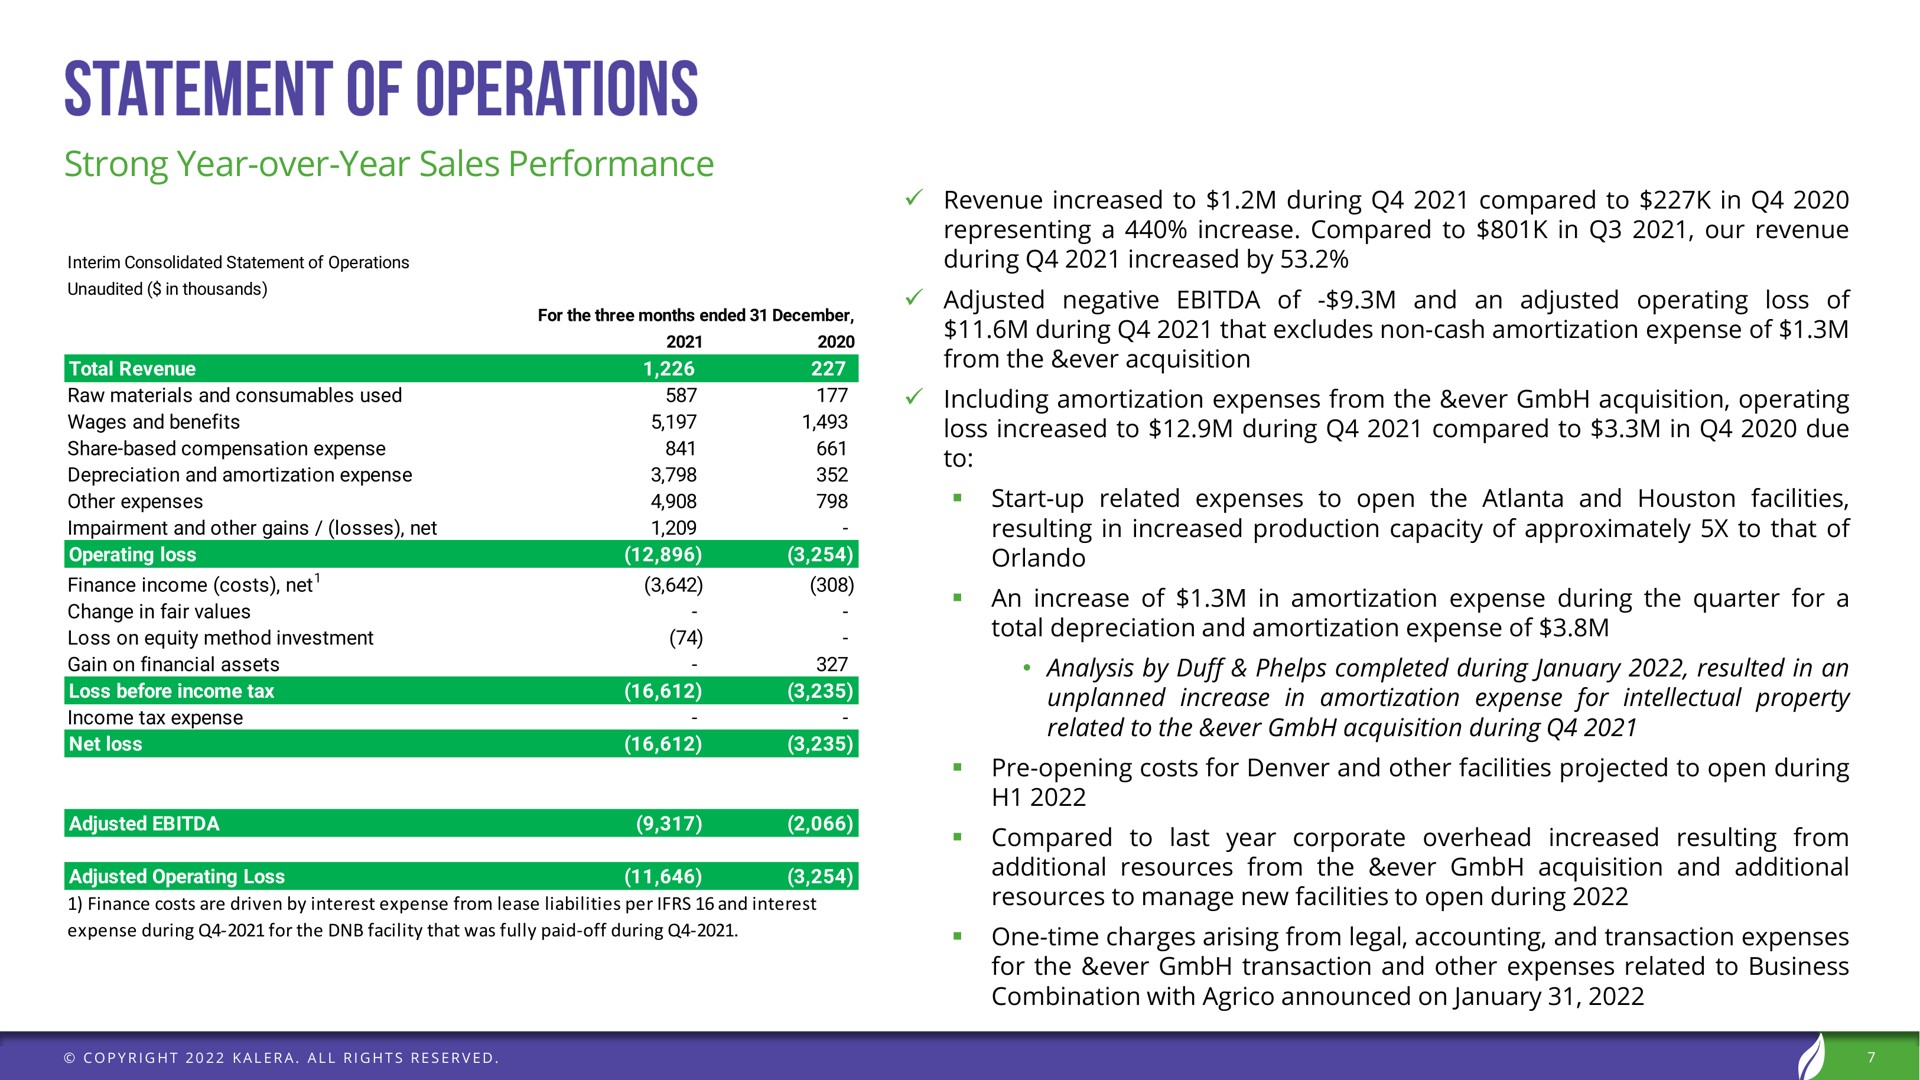 strong year over year sales performance statement of operations | Kalera